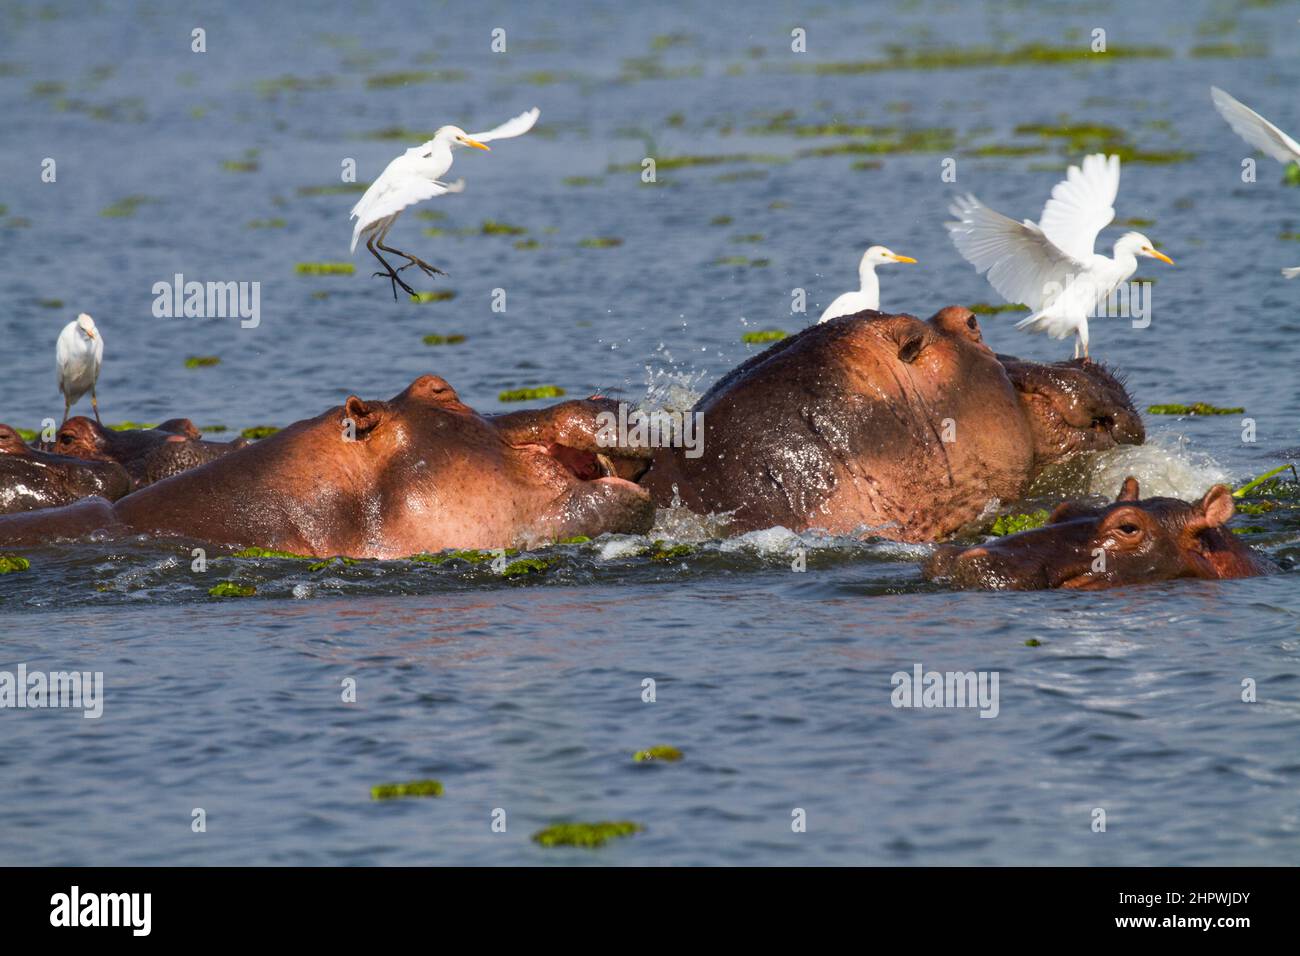 Group of hippos on Lake Victoria in Uganda Cattle egret stand on their backs  And flying around Stock Photo